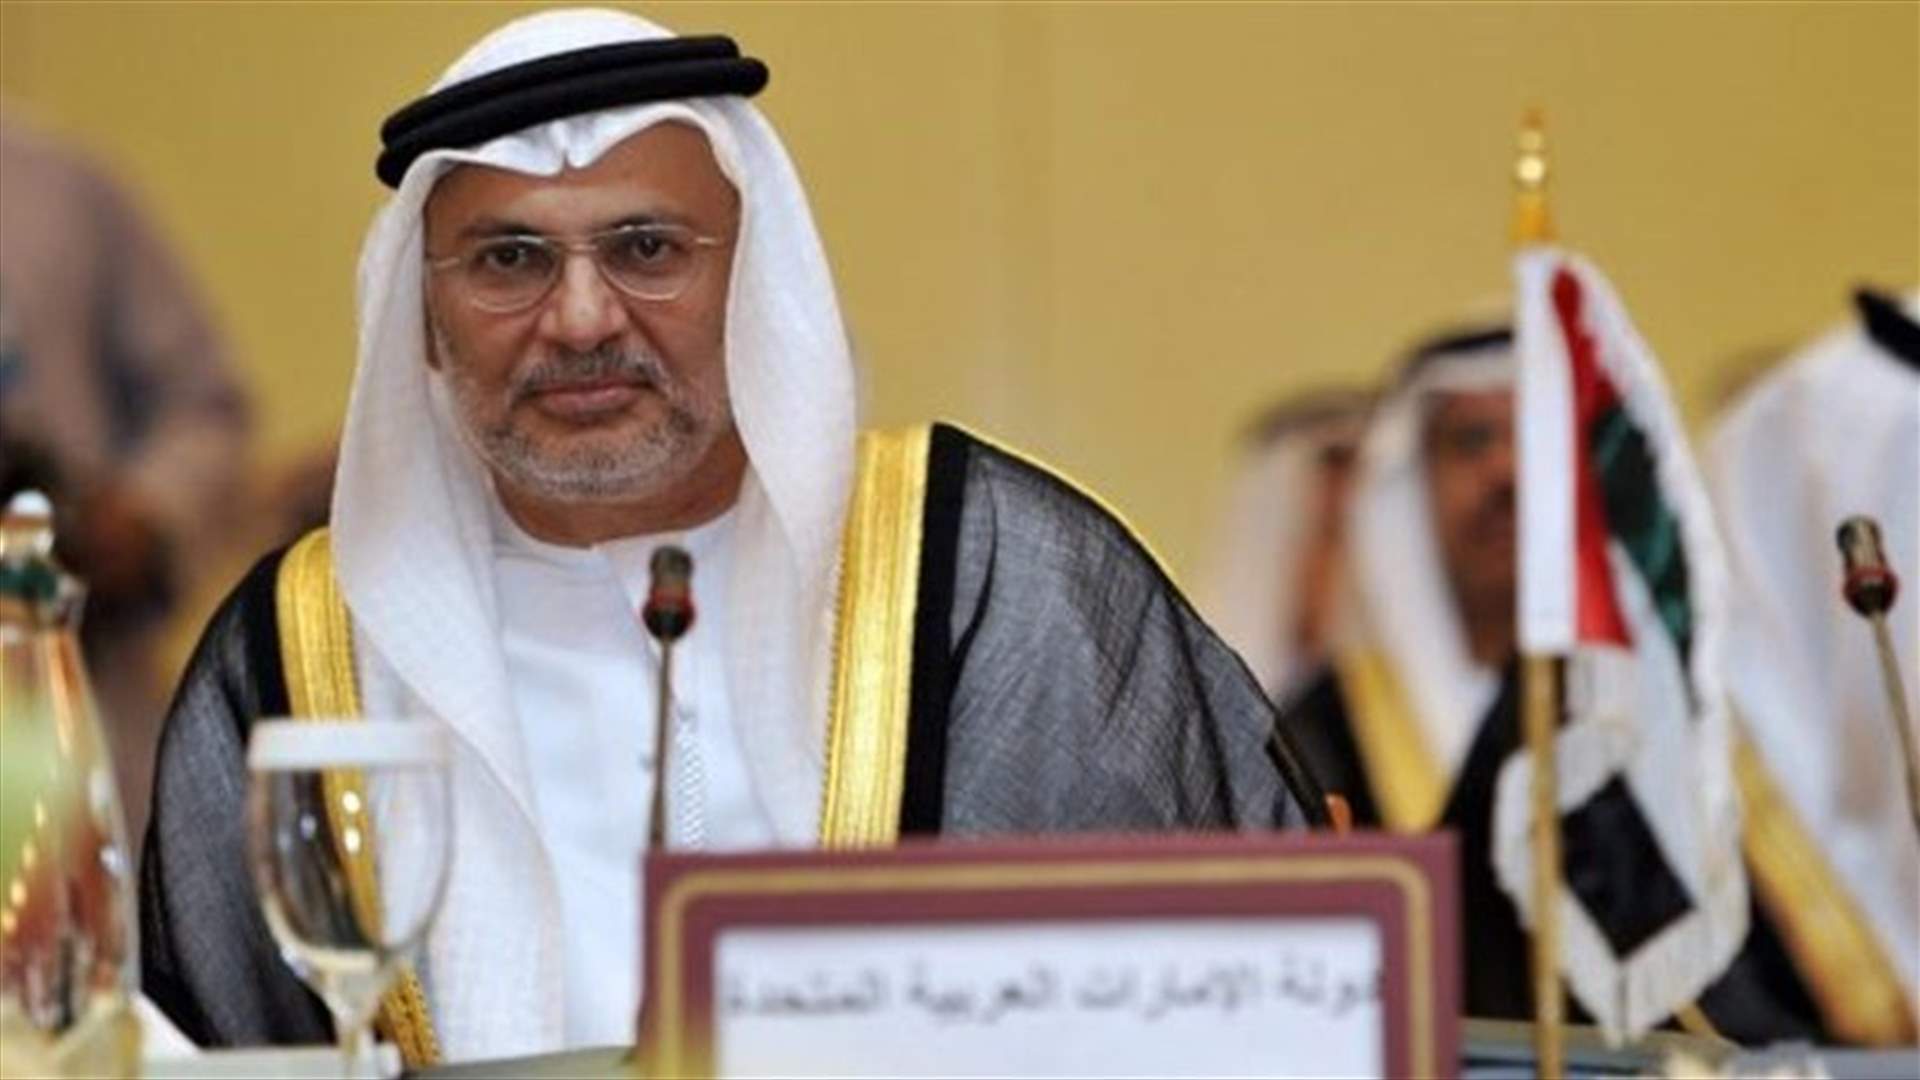 UAE Minister of Foreign Affairs comments on Nasrallah’s speech